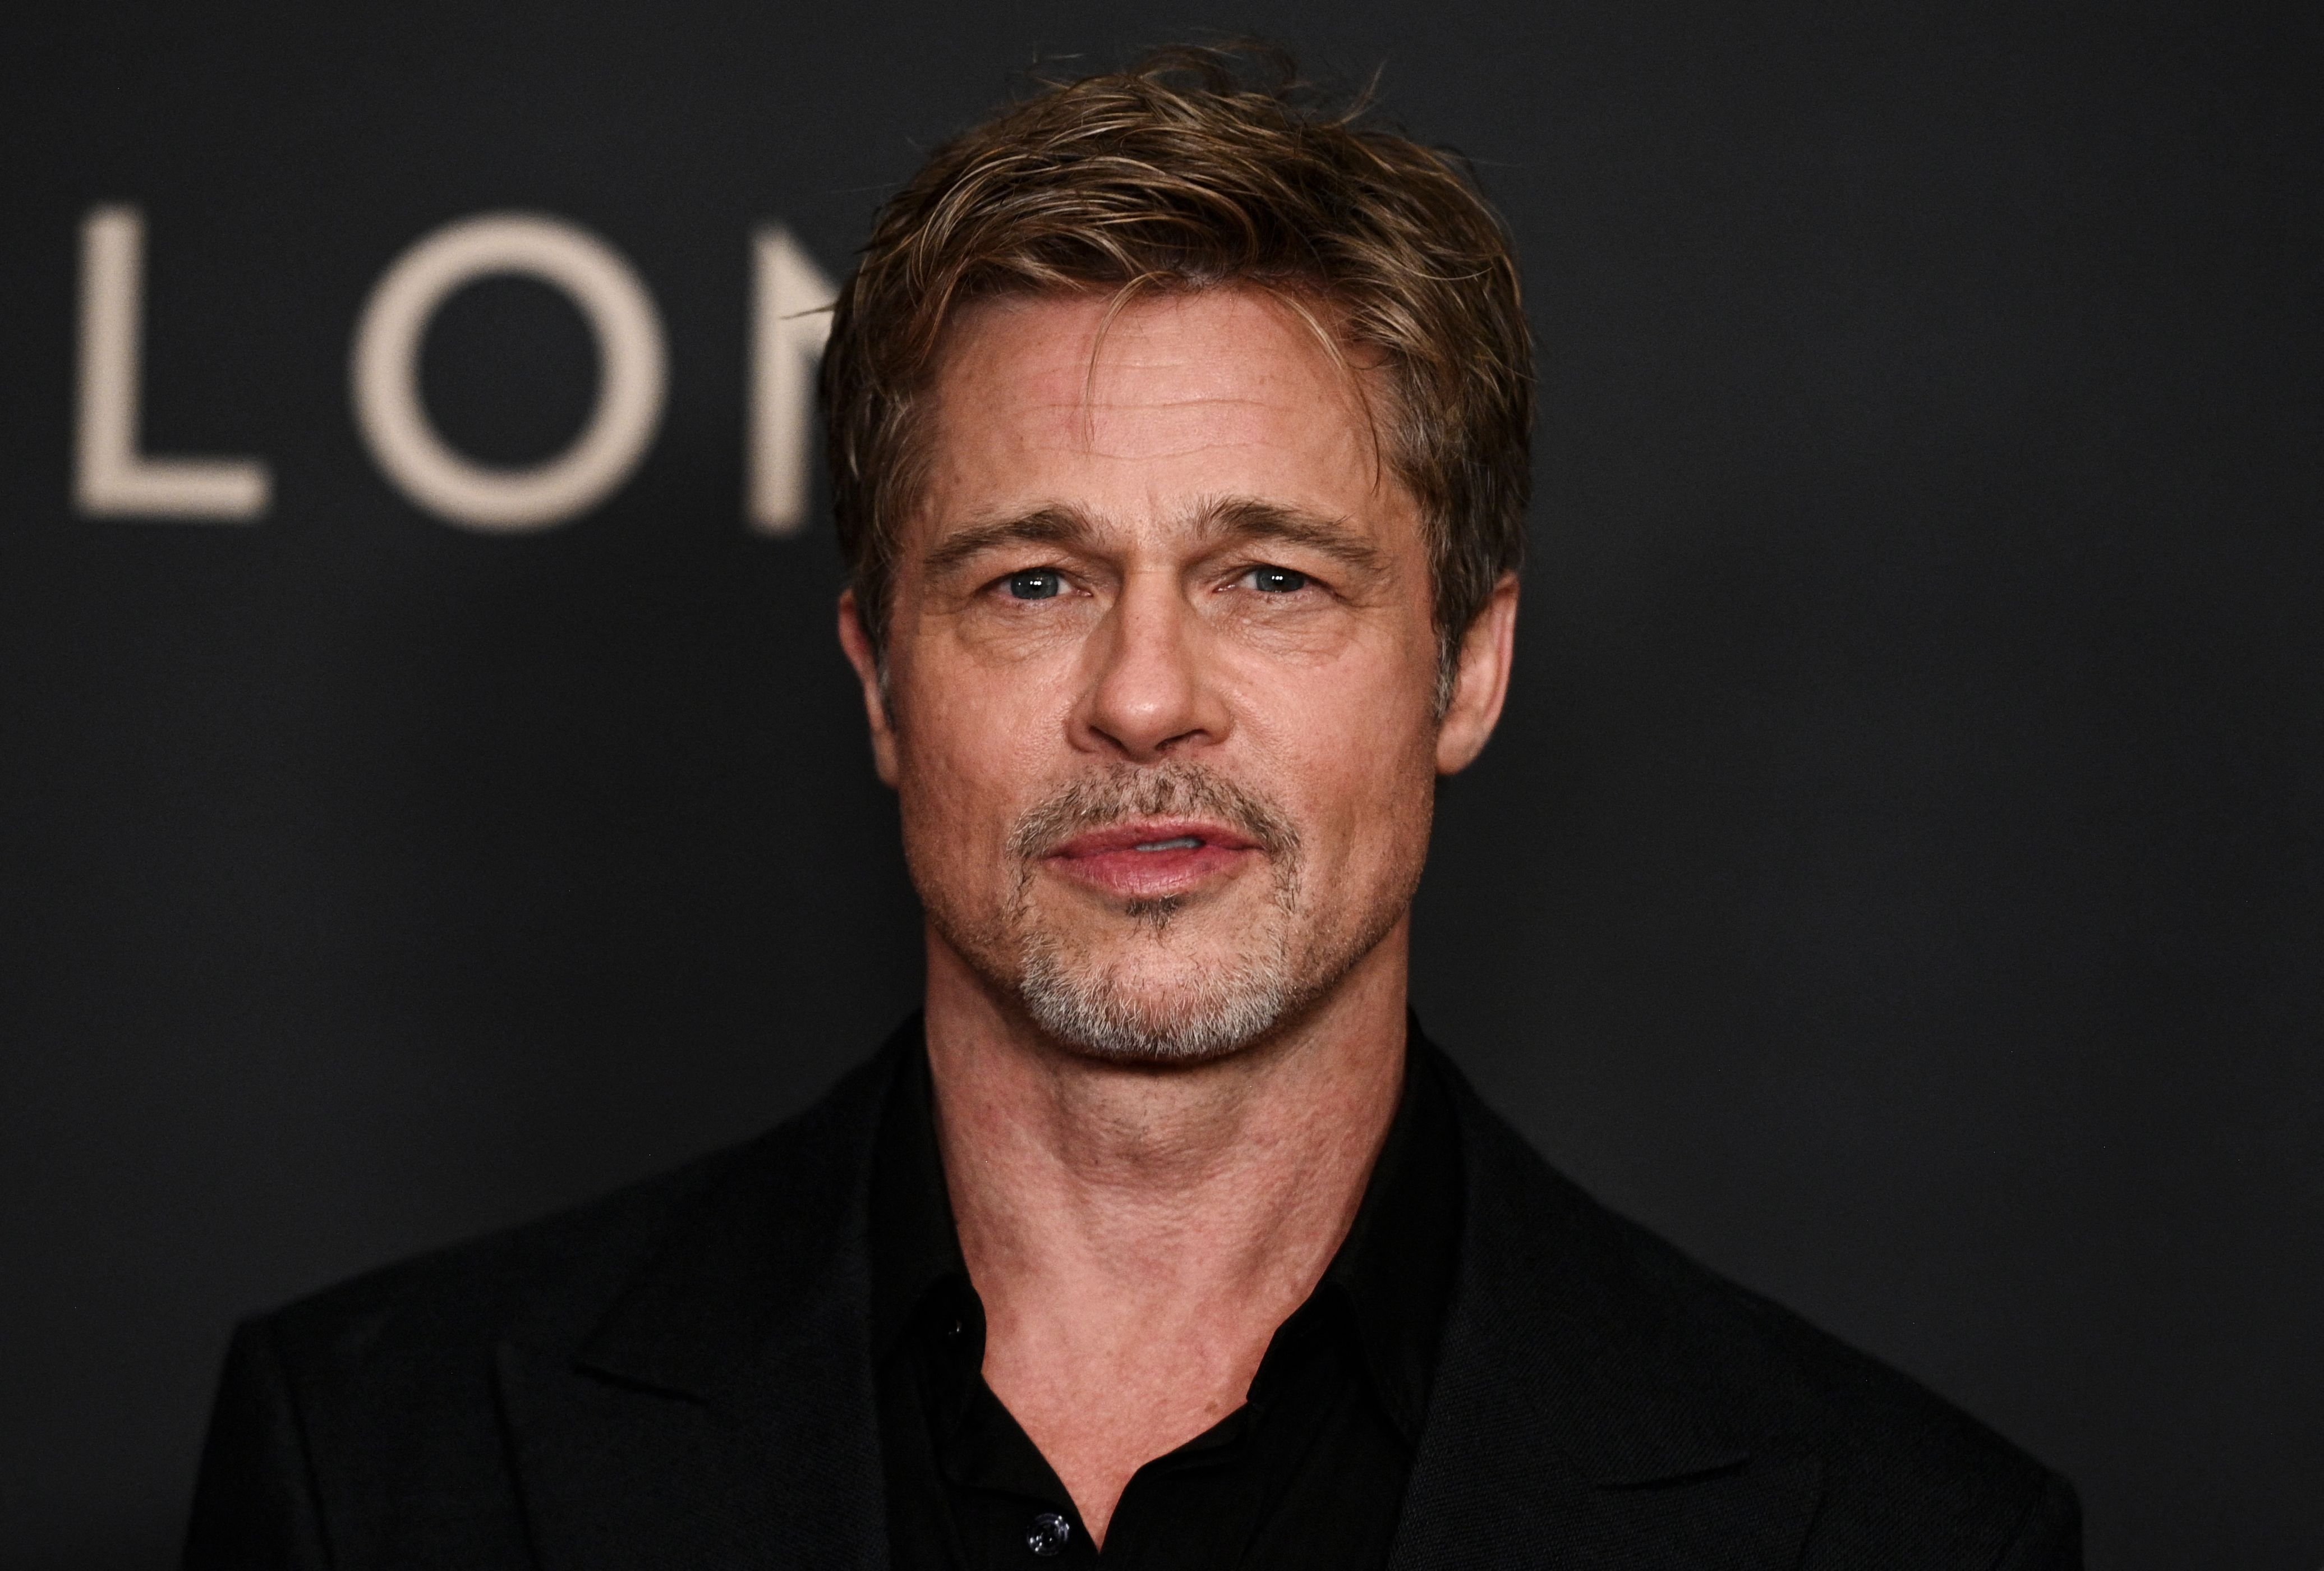 Brad Pitt poses ahead of the French premiere of "Babylon" at le Grand Rex in Paris on January 14, 2023. | Source: Getty Images